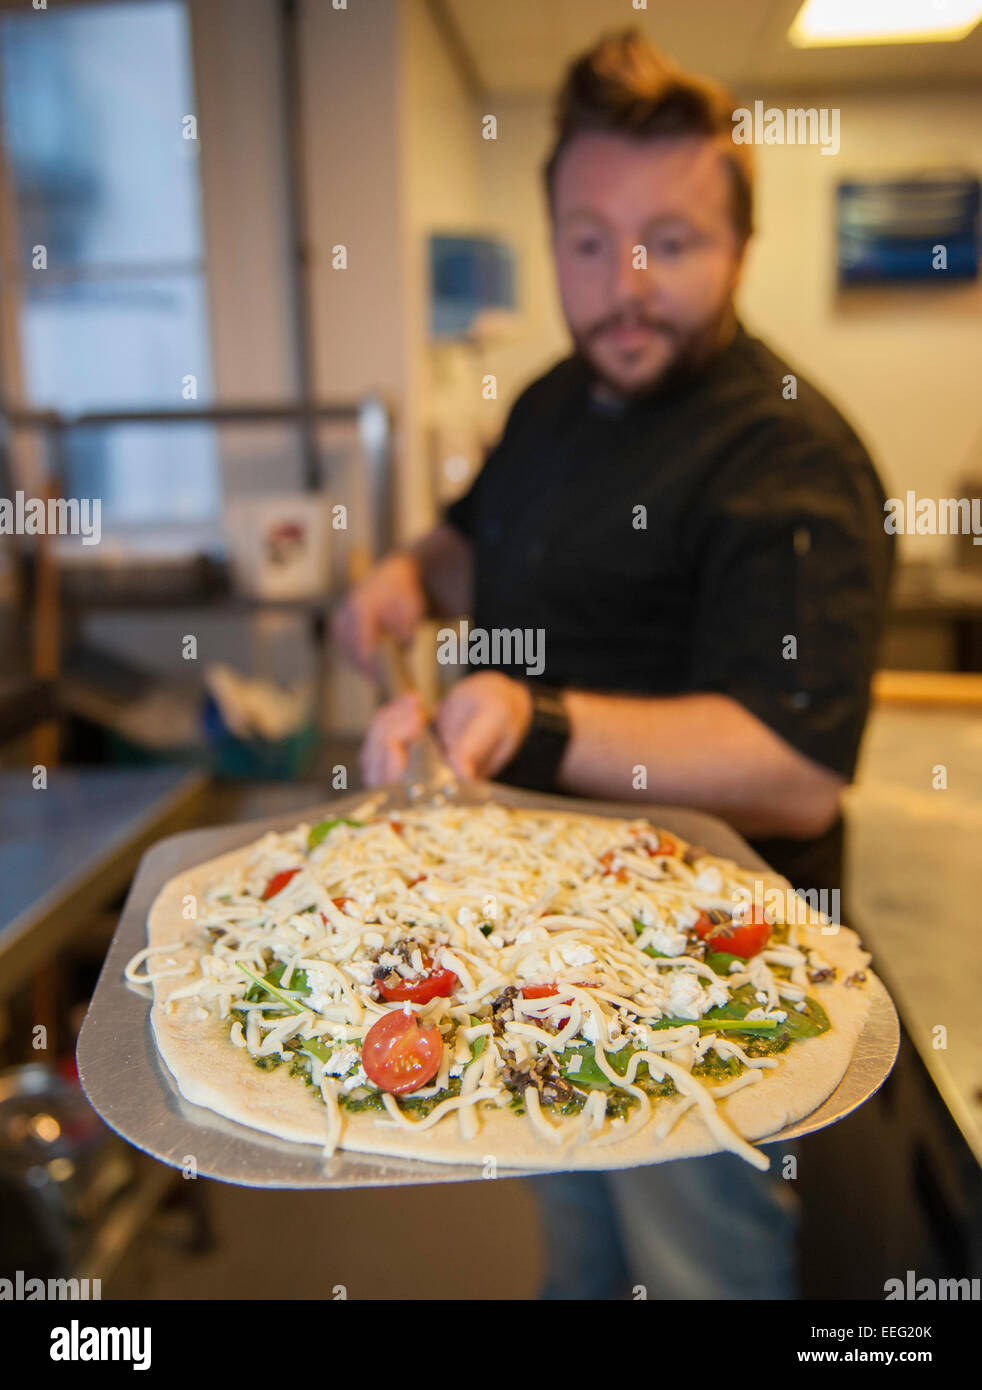 A baker with a pizza on a peel shovel Stock Photo